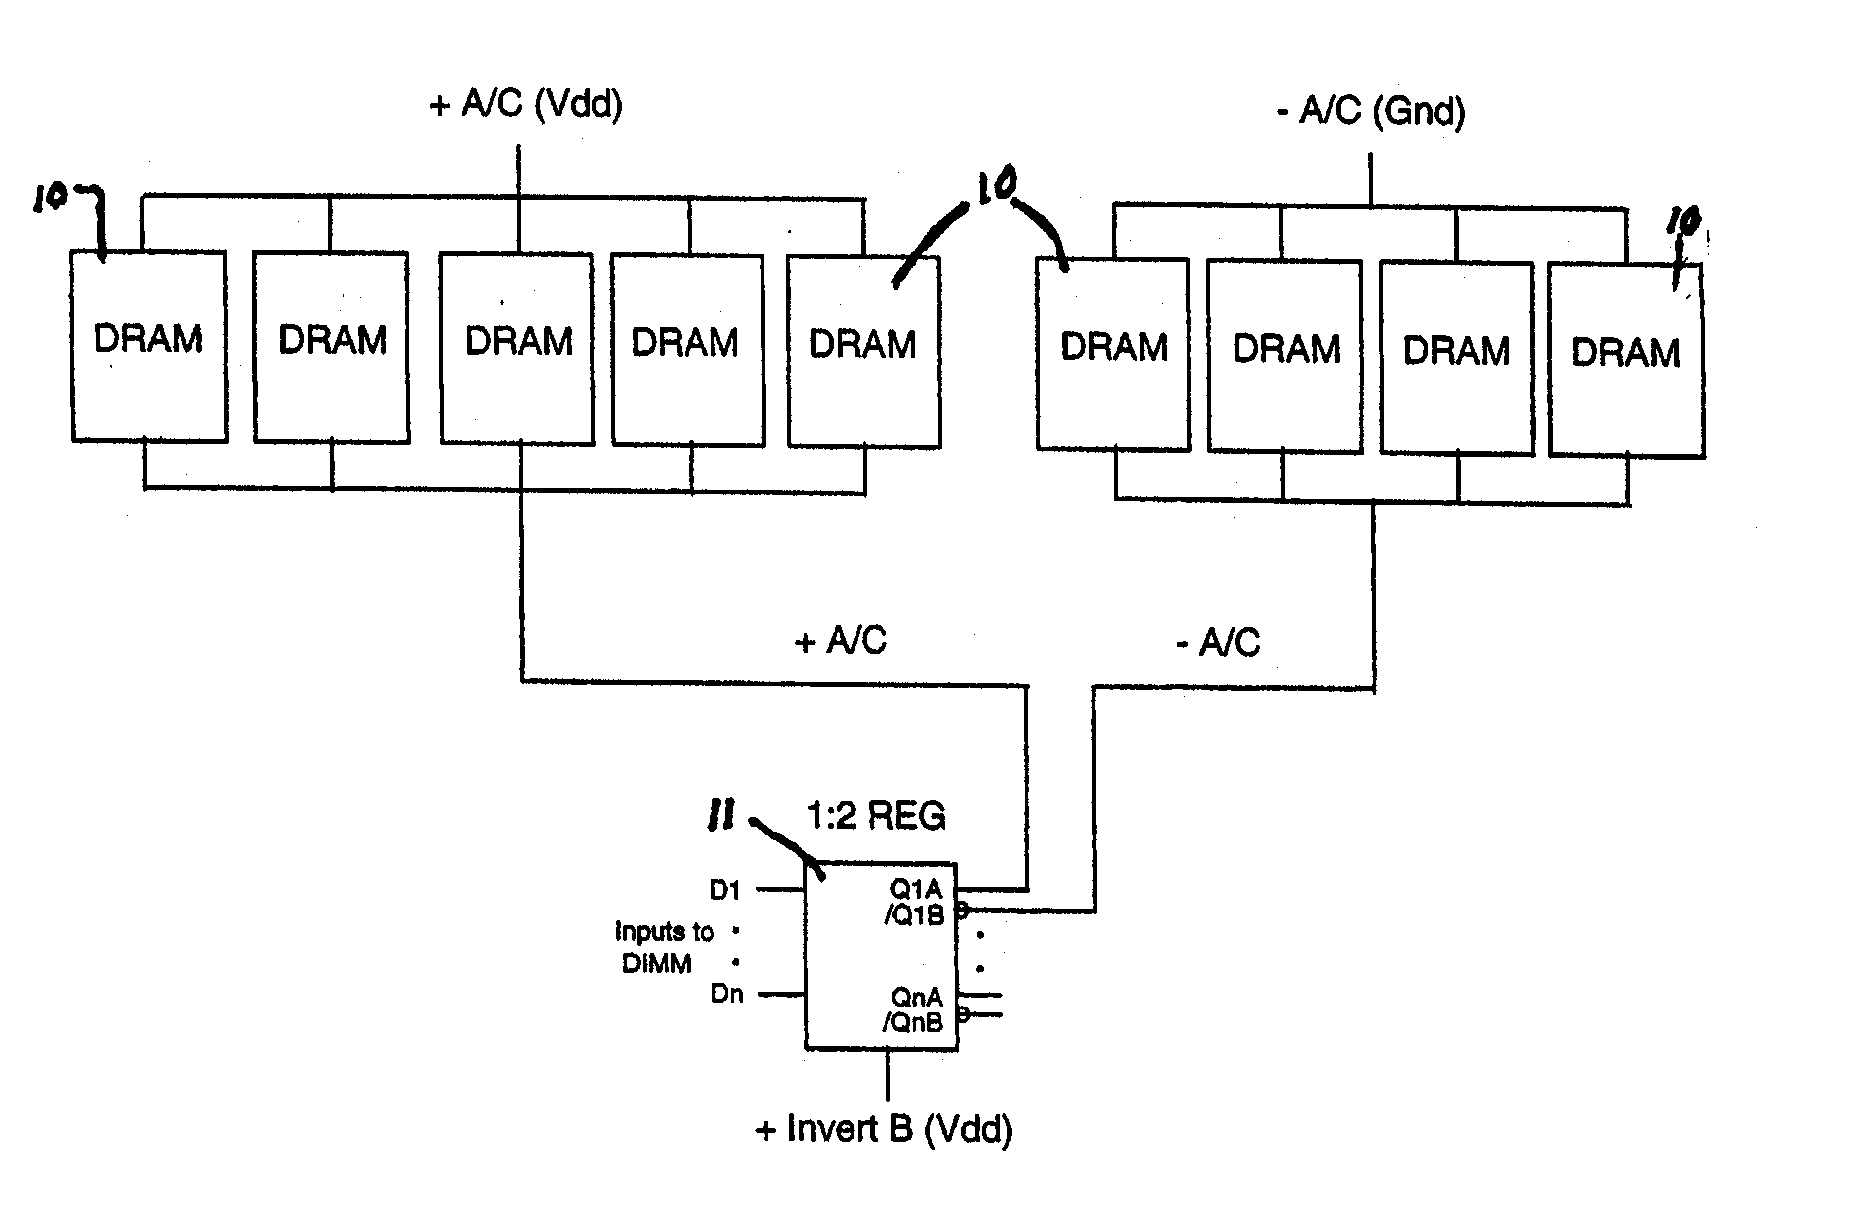 Memory device with programmable receivers to improve performance